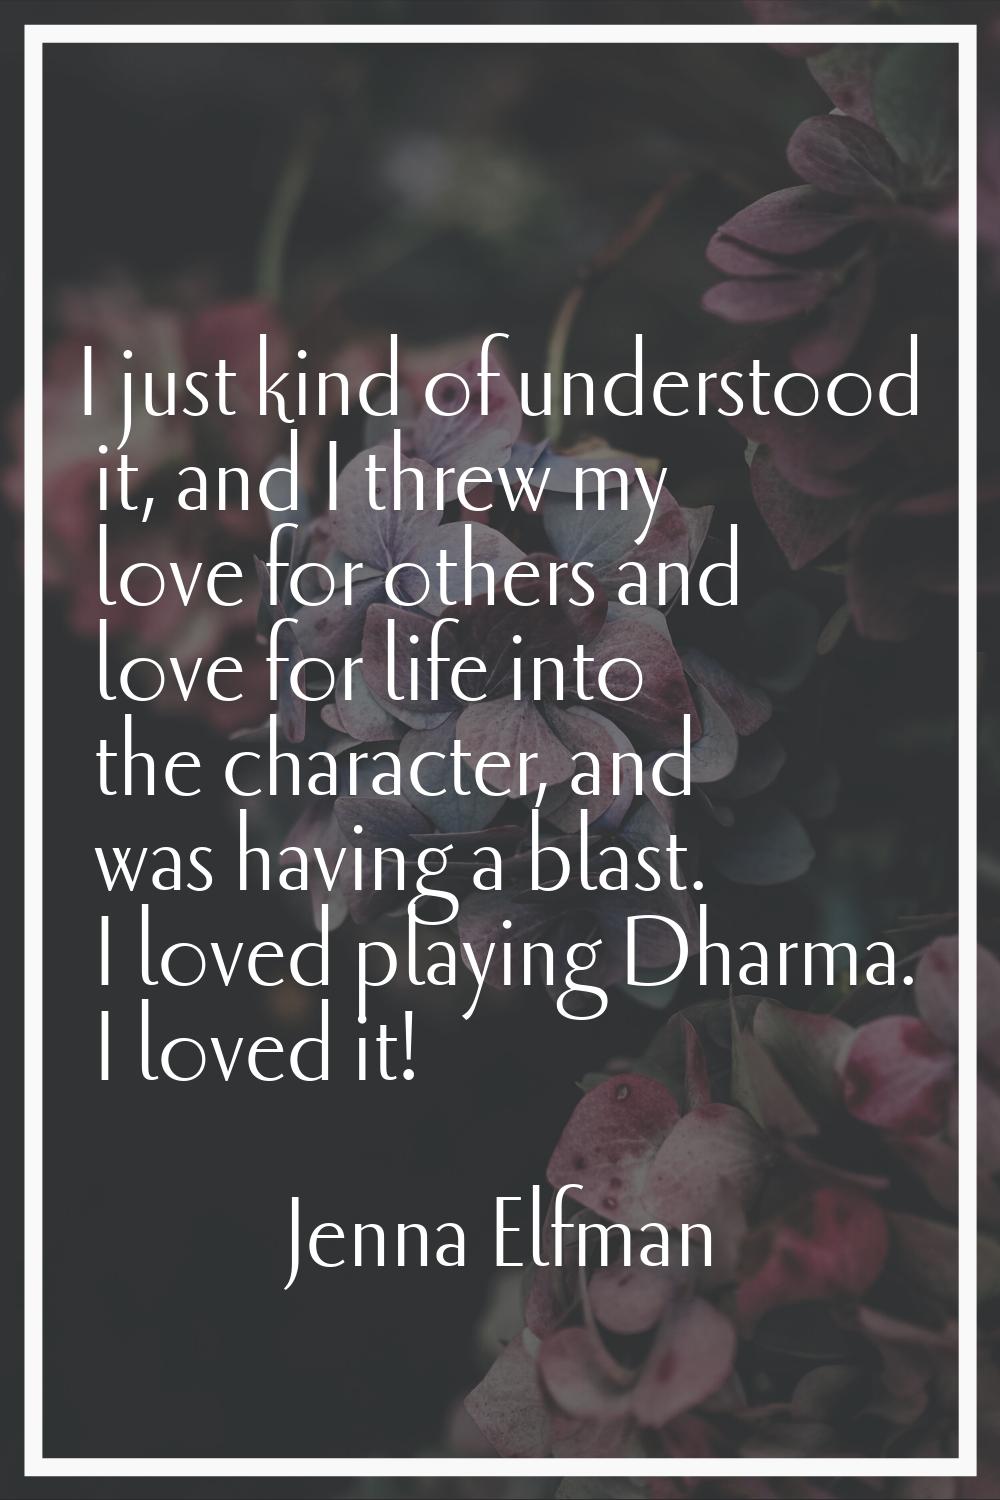 I just kind of understood it, and I threw my love for others and love for life into the character, 